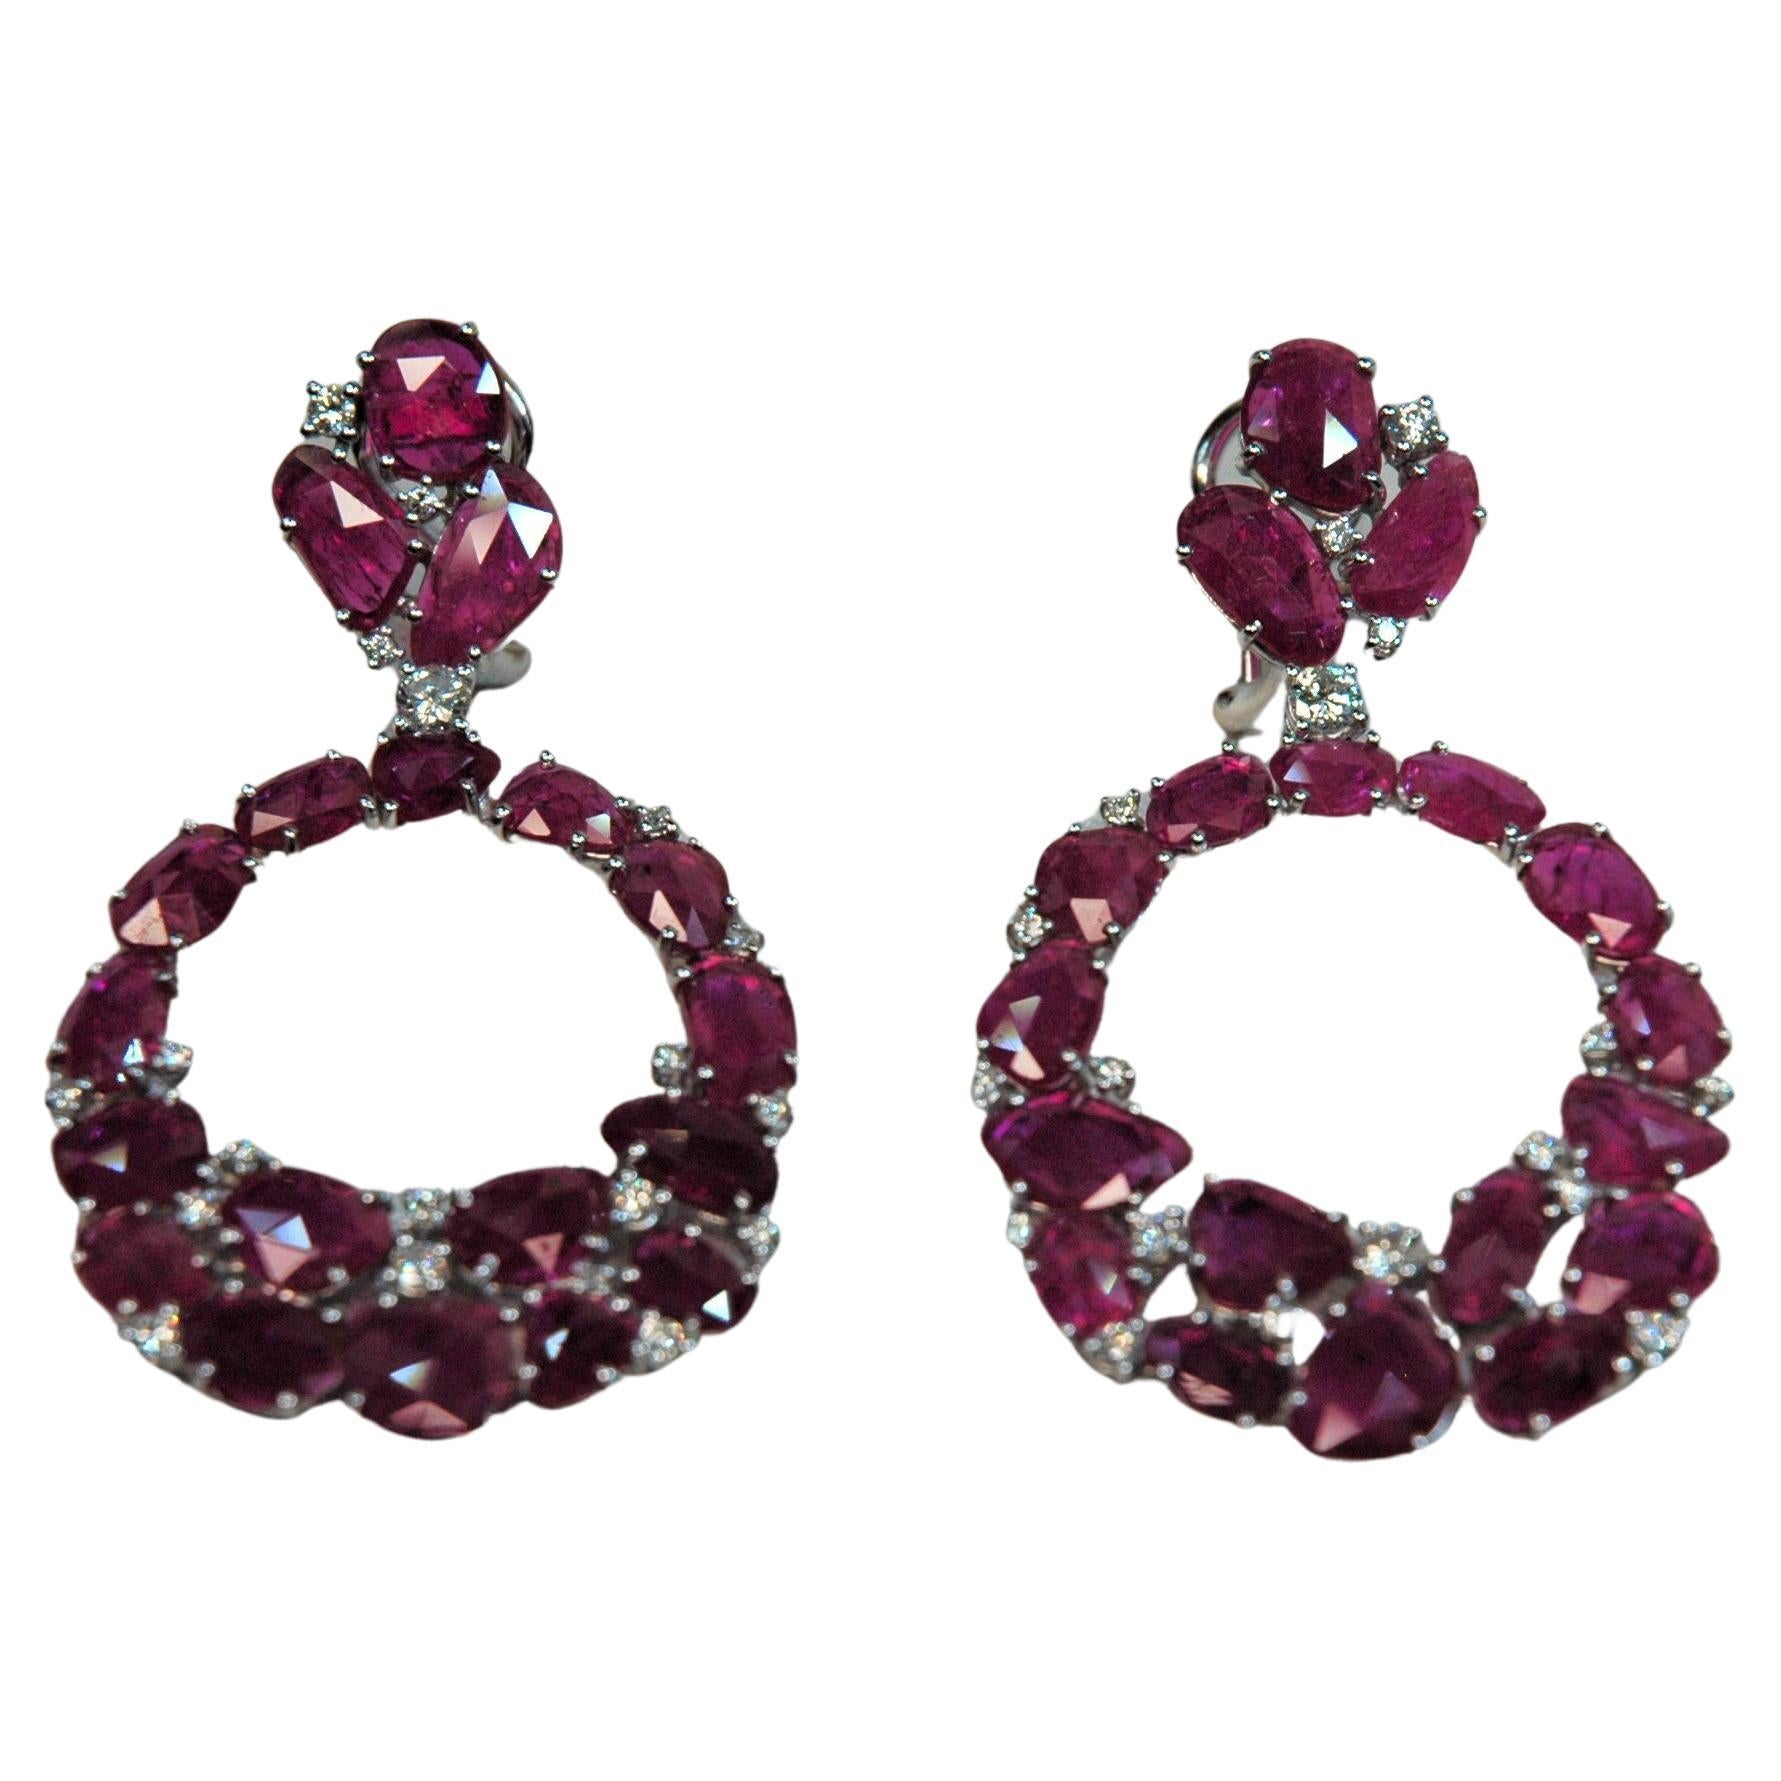 These very fashionable earrings are handmade in Italy. The ruby stones are flat and all different one from the other. They are put together with diamonds to create a perfect oval shape hanging from the top of the earrings. You can wear these